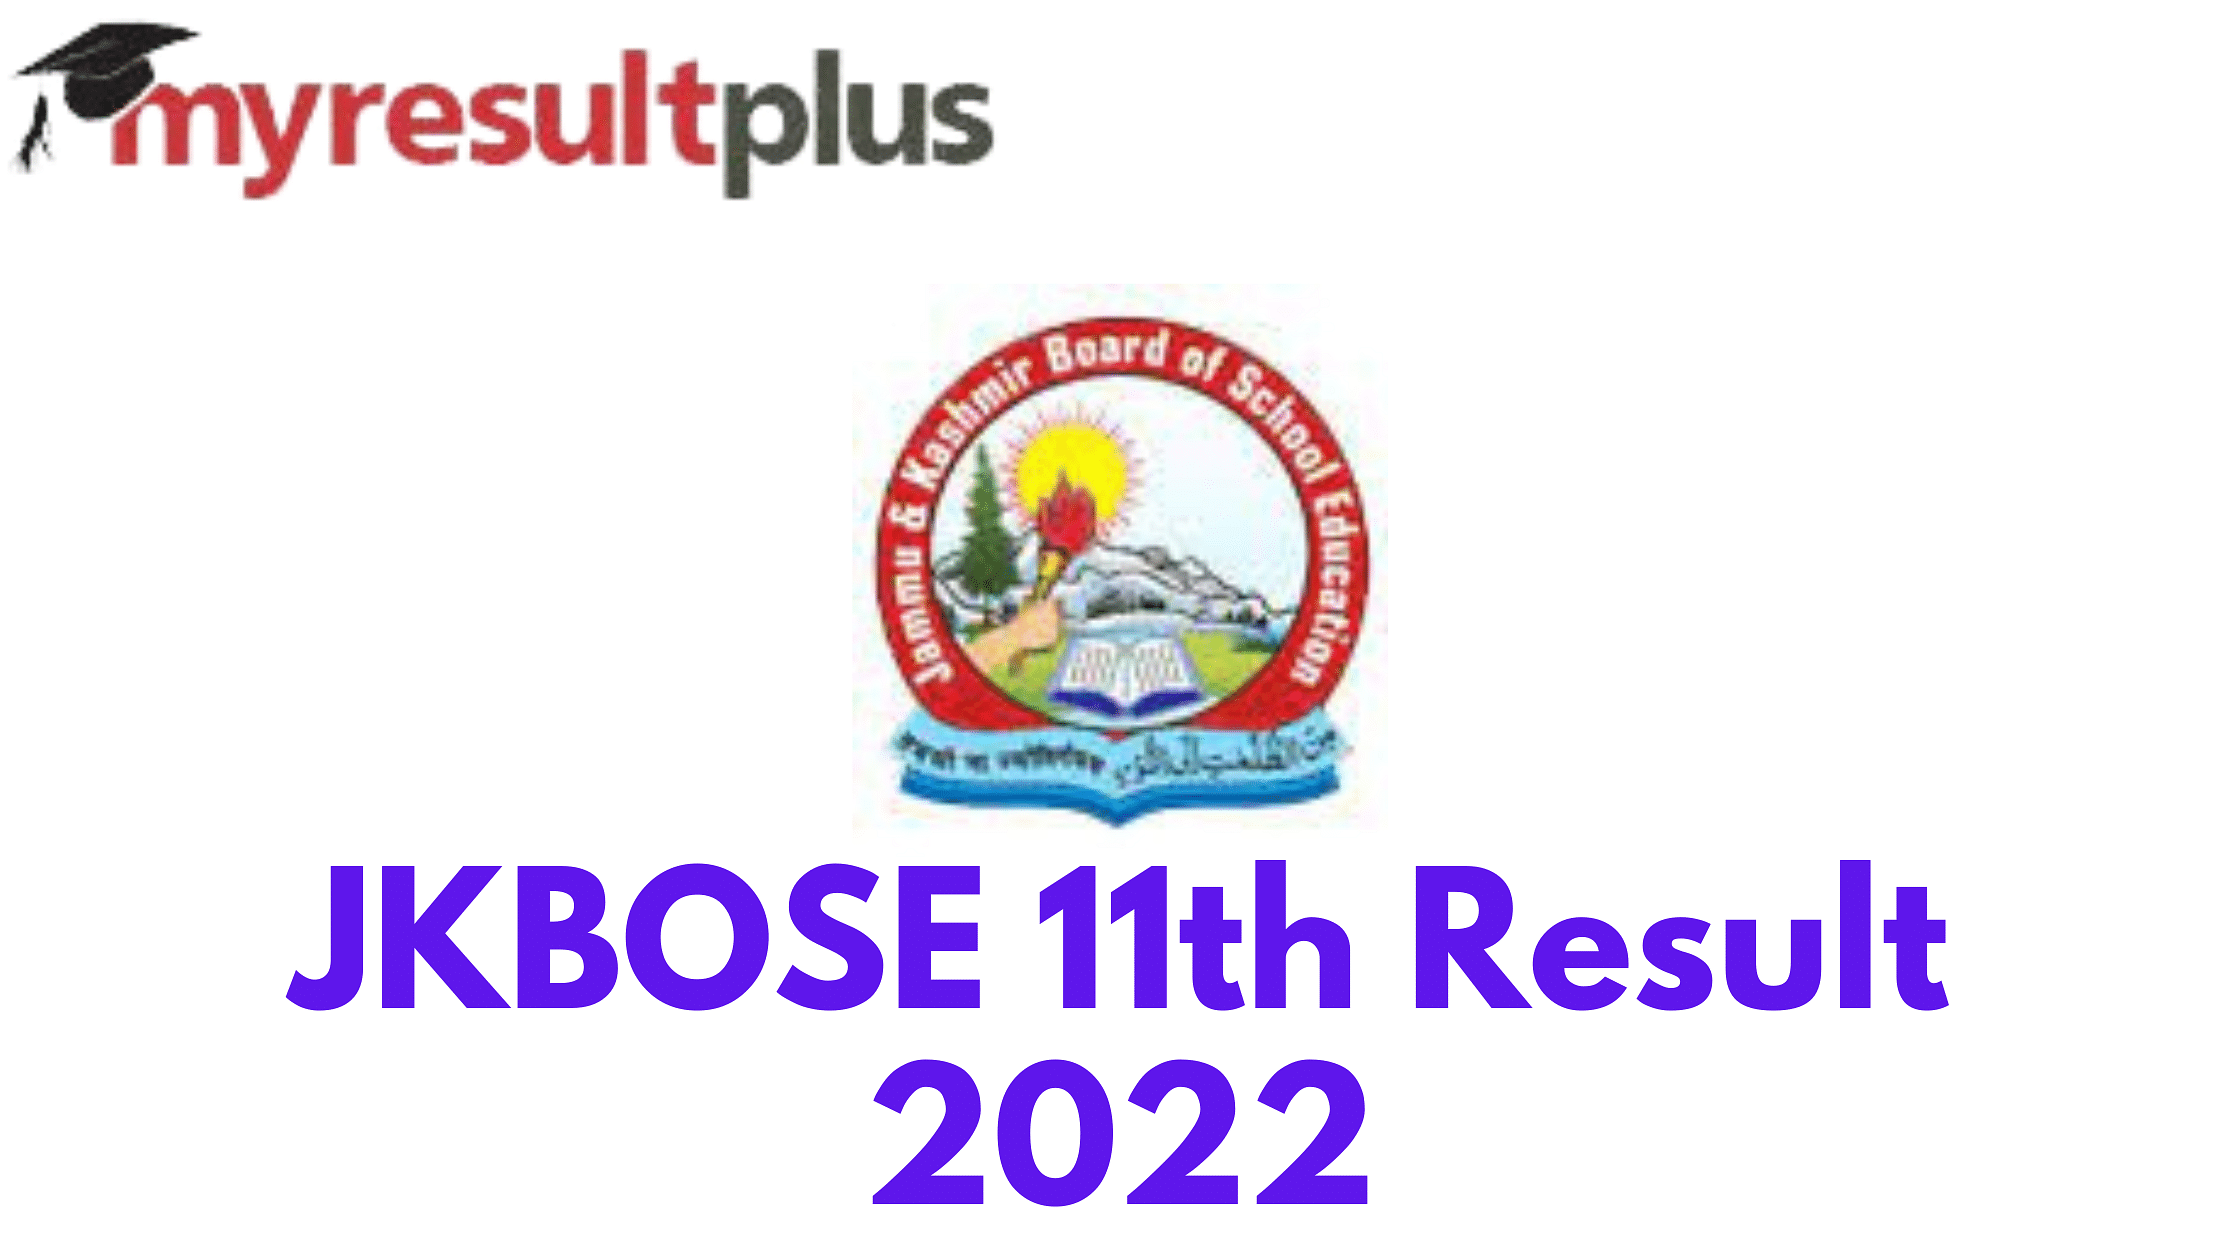 JKBOSE 11th Result 2022 Declared for Jammu Division, Know How to Check Here